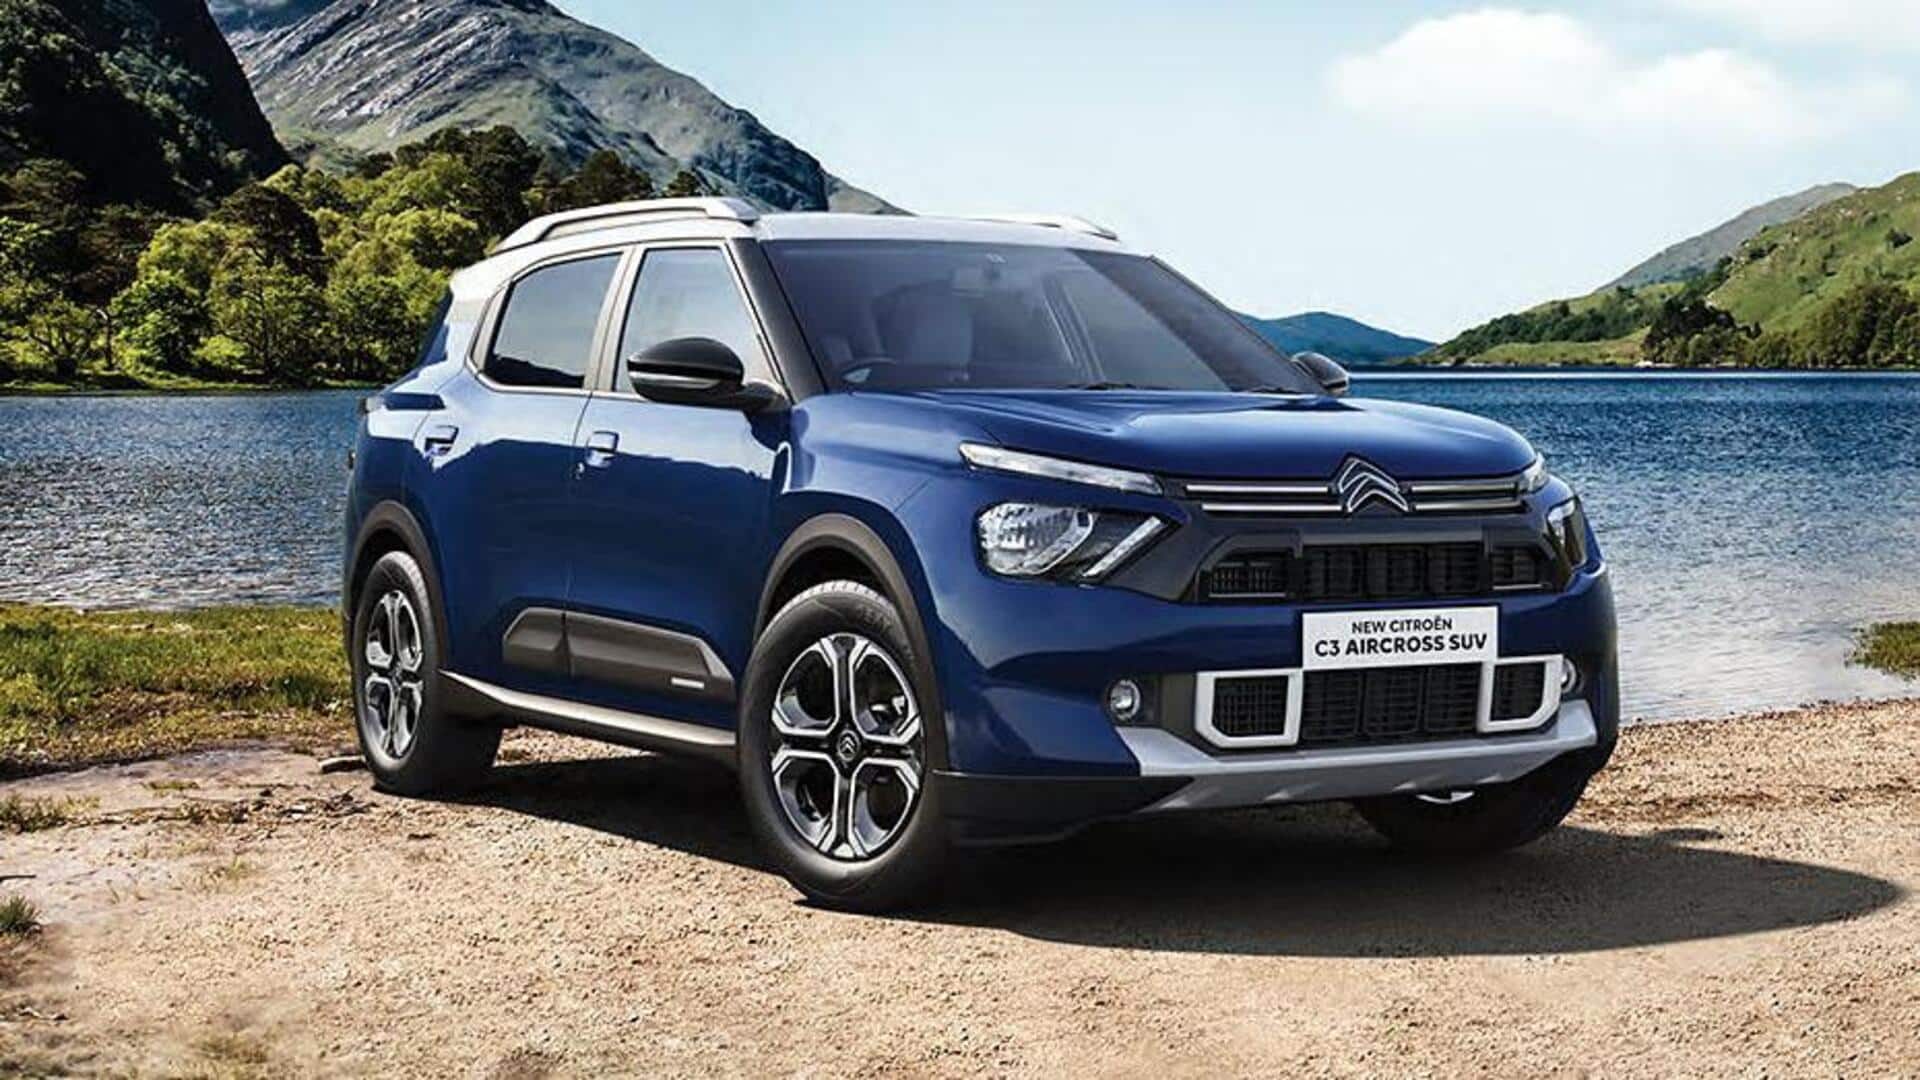 Citroen C3 Aircross (automatic) bookings commence, deliveries in February